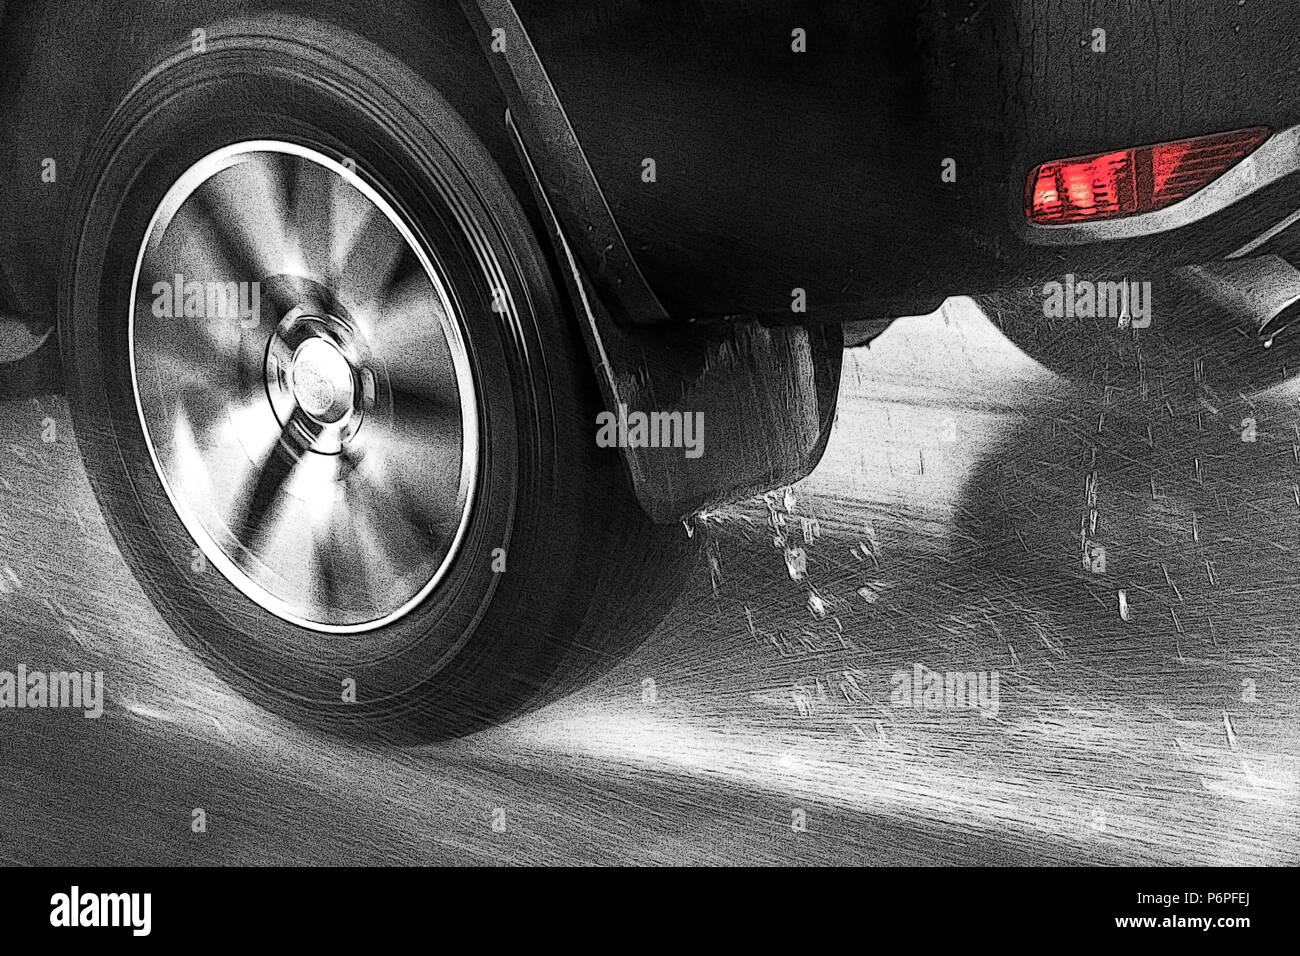 Detail of the rear wheel of a car driving in the rain on a wet road. Aquaplaning in road traffic. Stock Photo